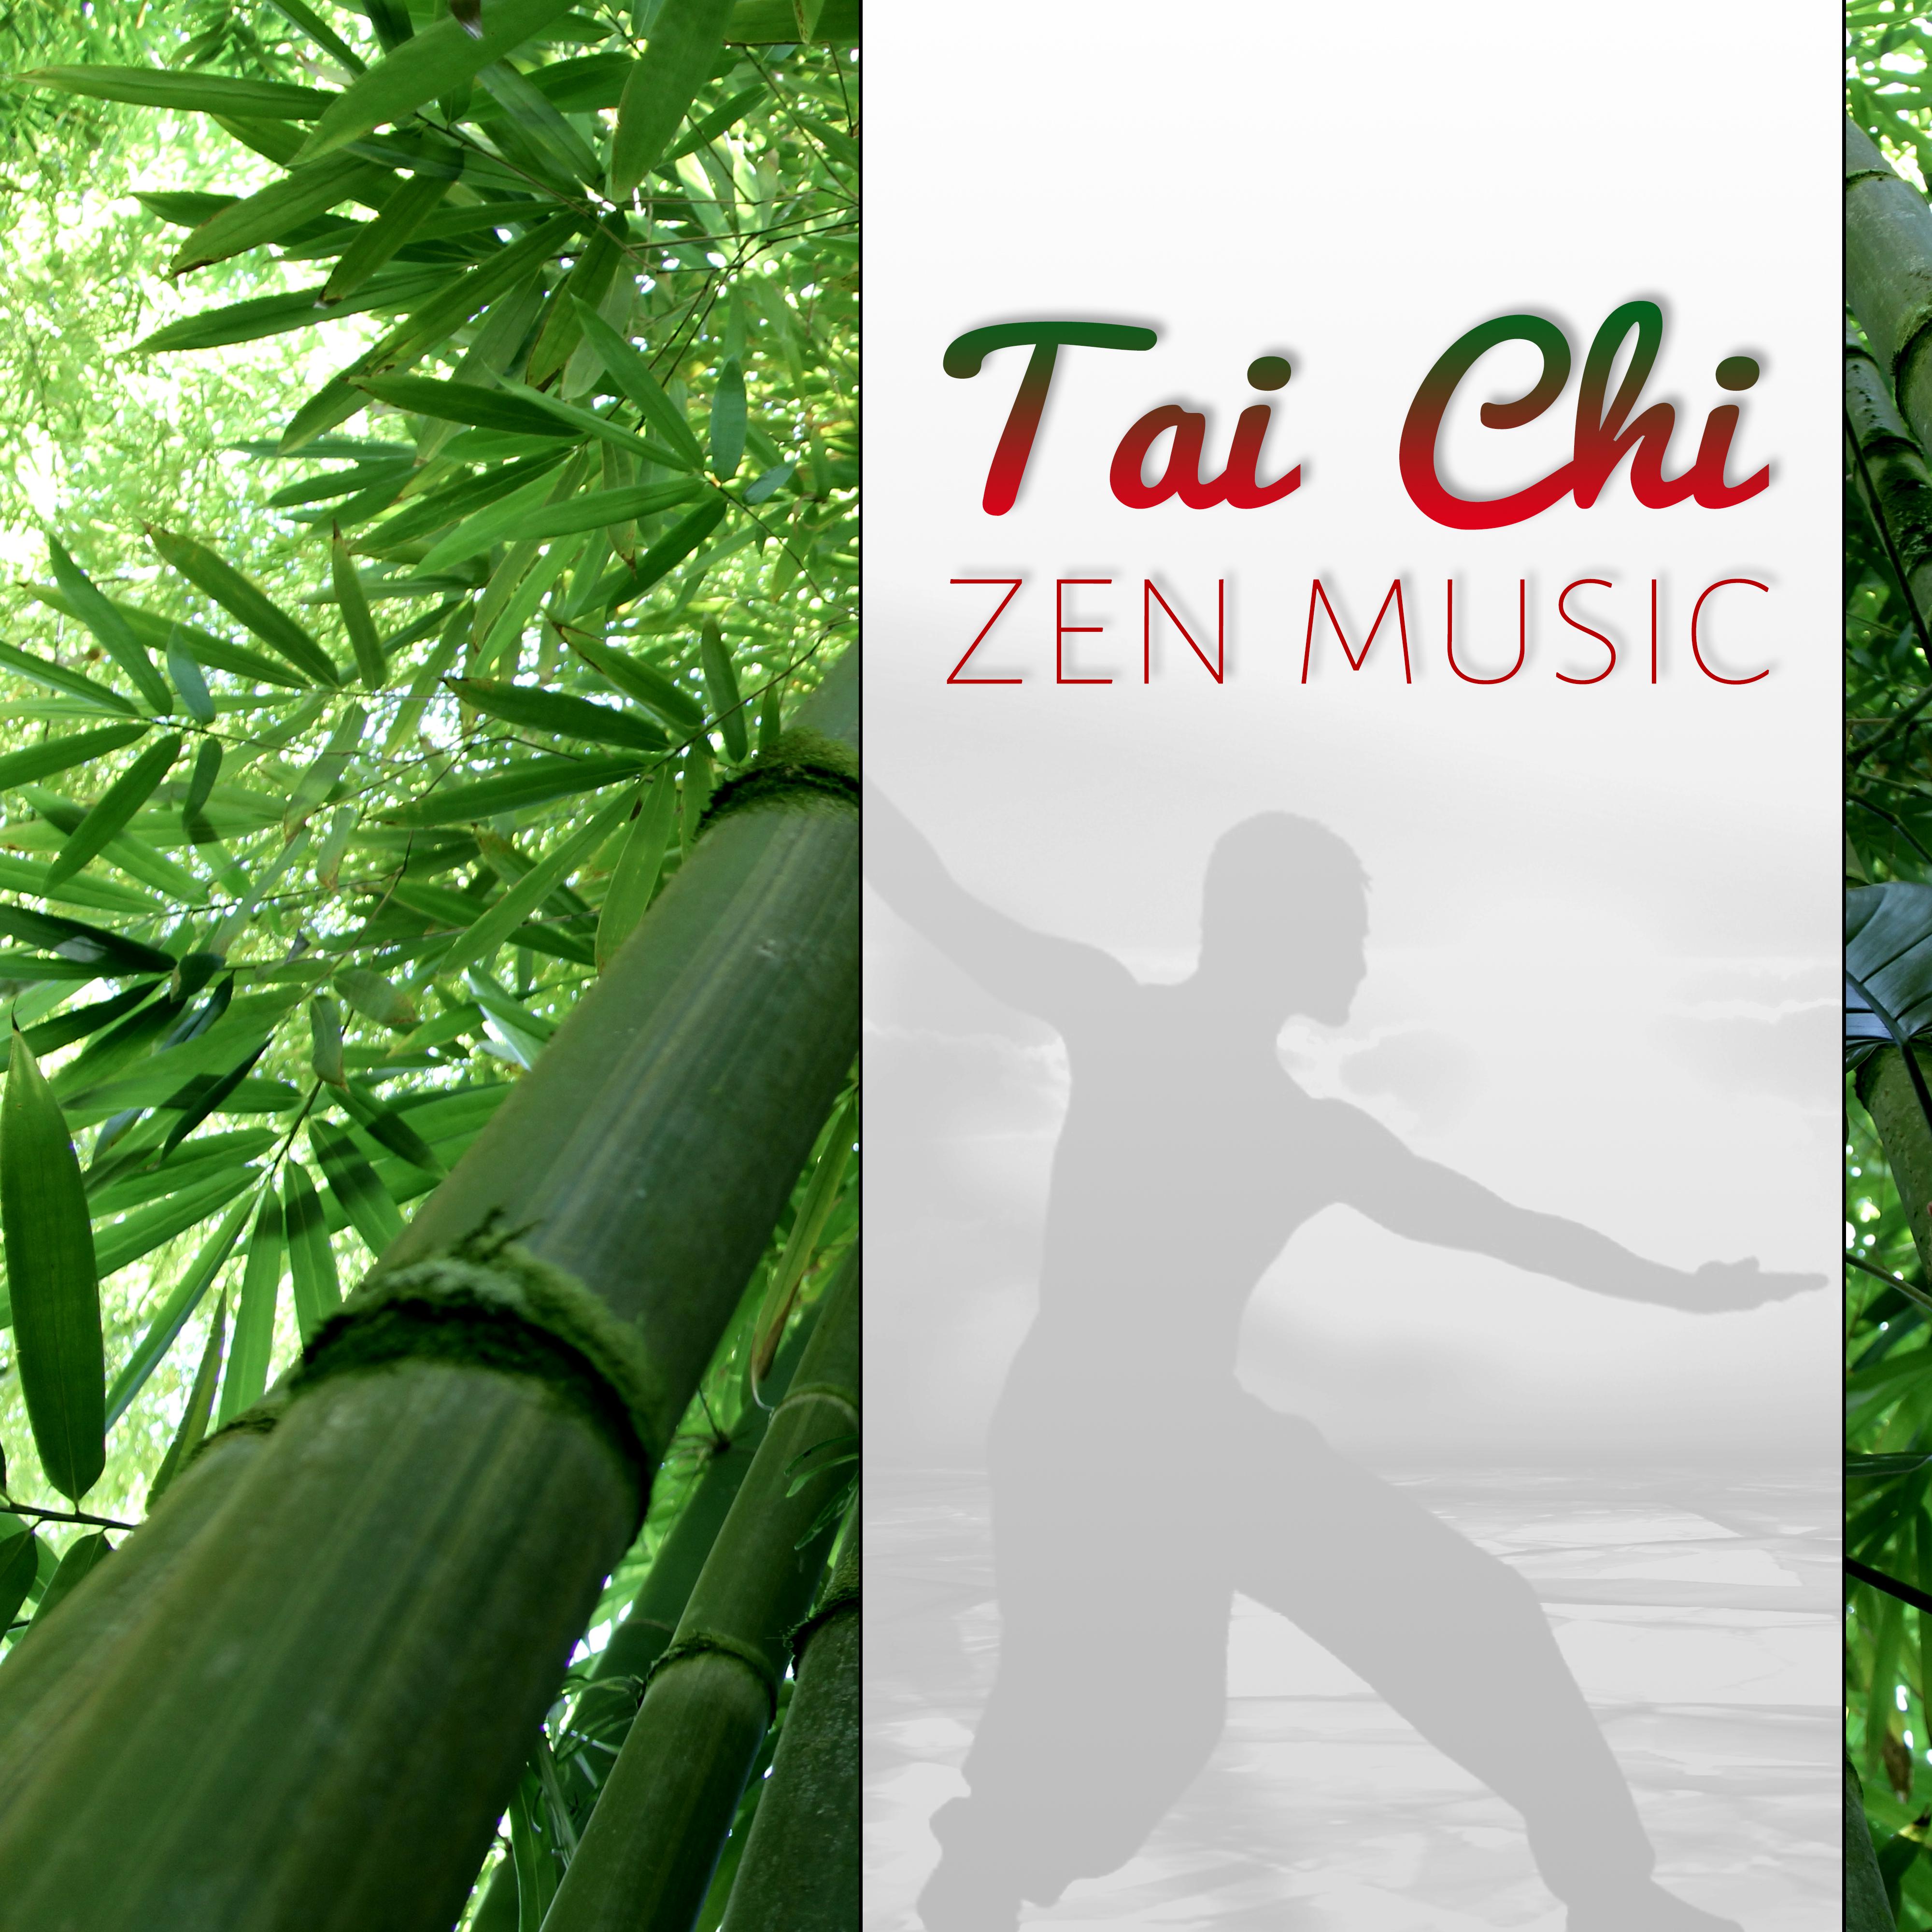 Tai Chi Zen Music – Relaxing Oriental Music with Nature Sounds for Exercises & Mindfulness Meditation Shiatsu Massage, Yoga Relaxation & Stress Management